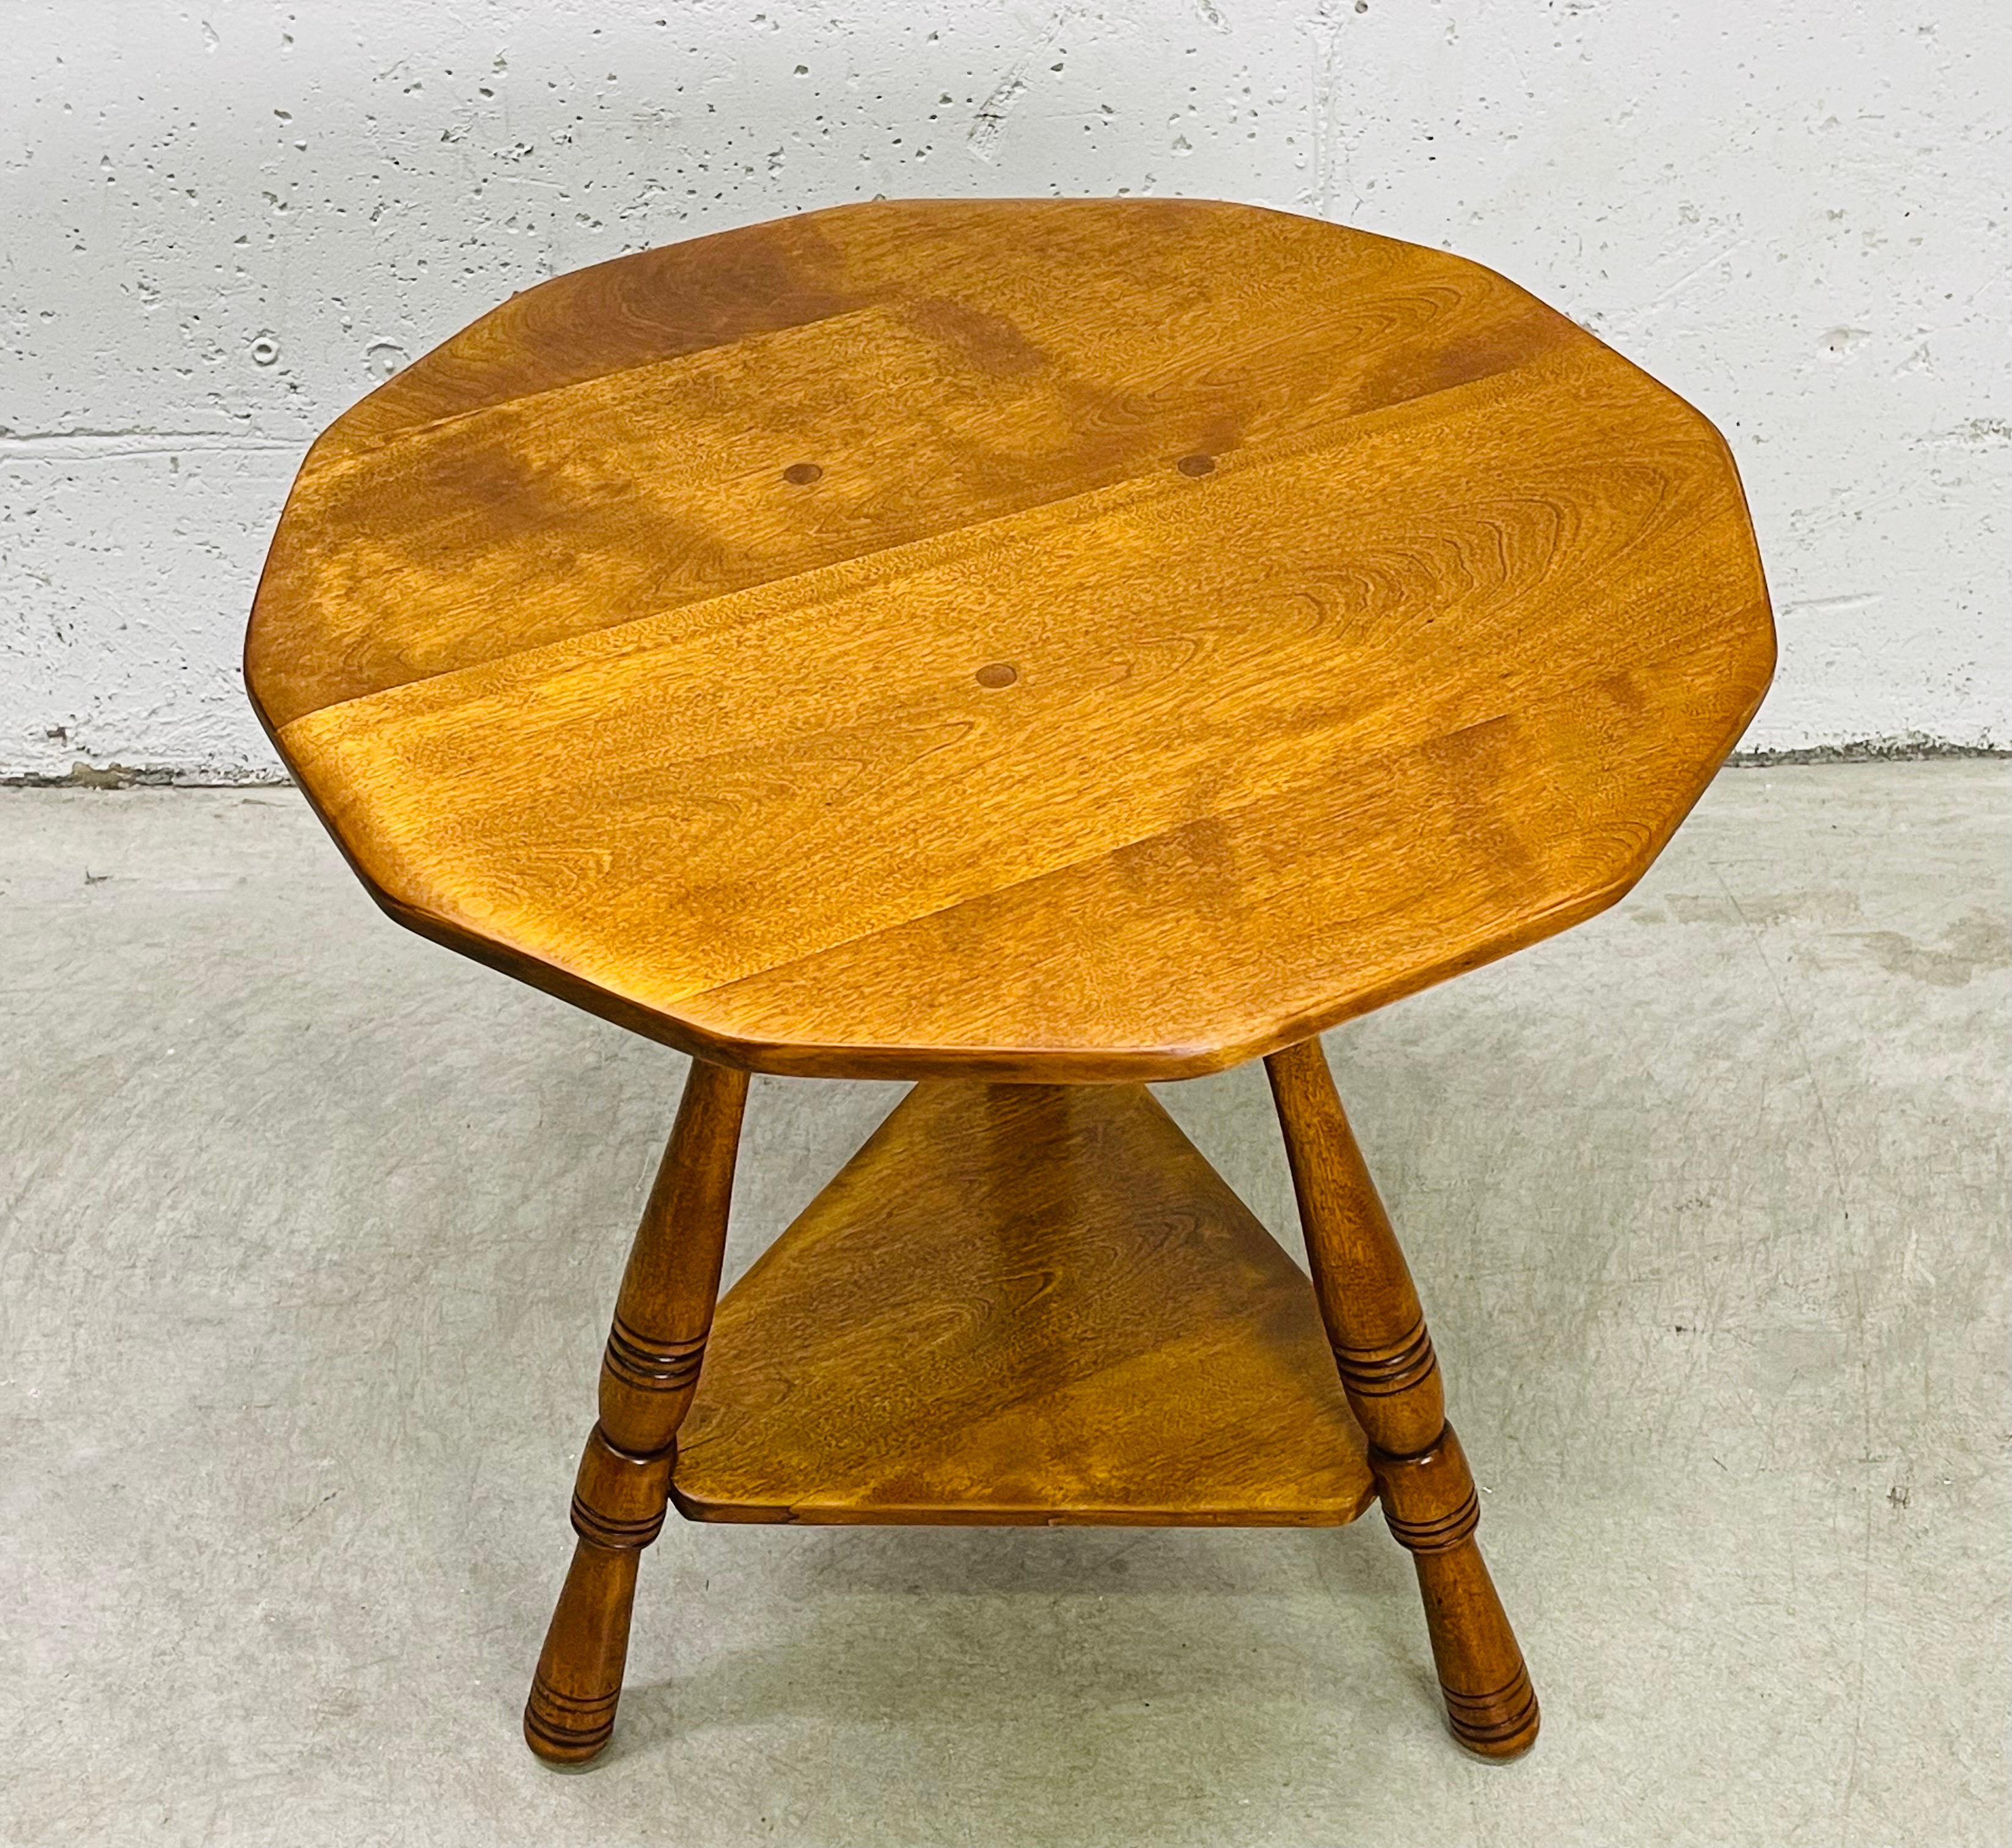 Vintage 1960s maple wood side table by Cushman of Vermont. The table has twelve sides with an additional shelf underneath for storage. Peg joinery is visible as an accent on the top. Excellent refinshed condition. Marked underneath.